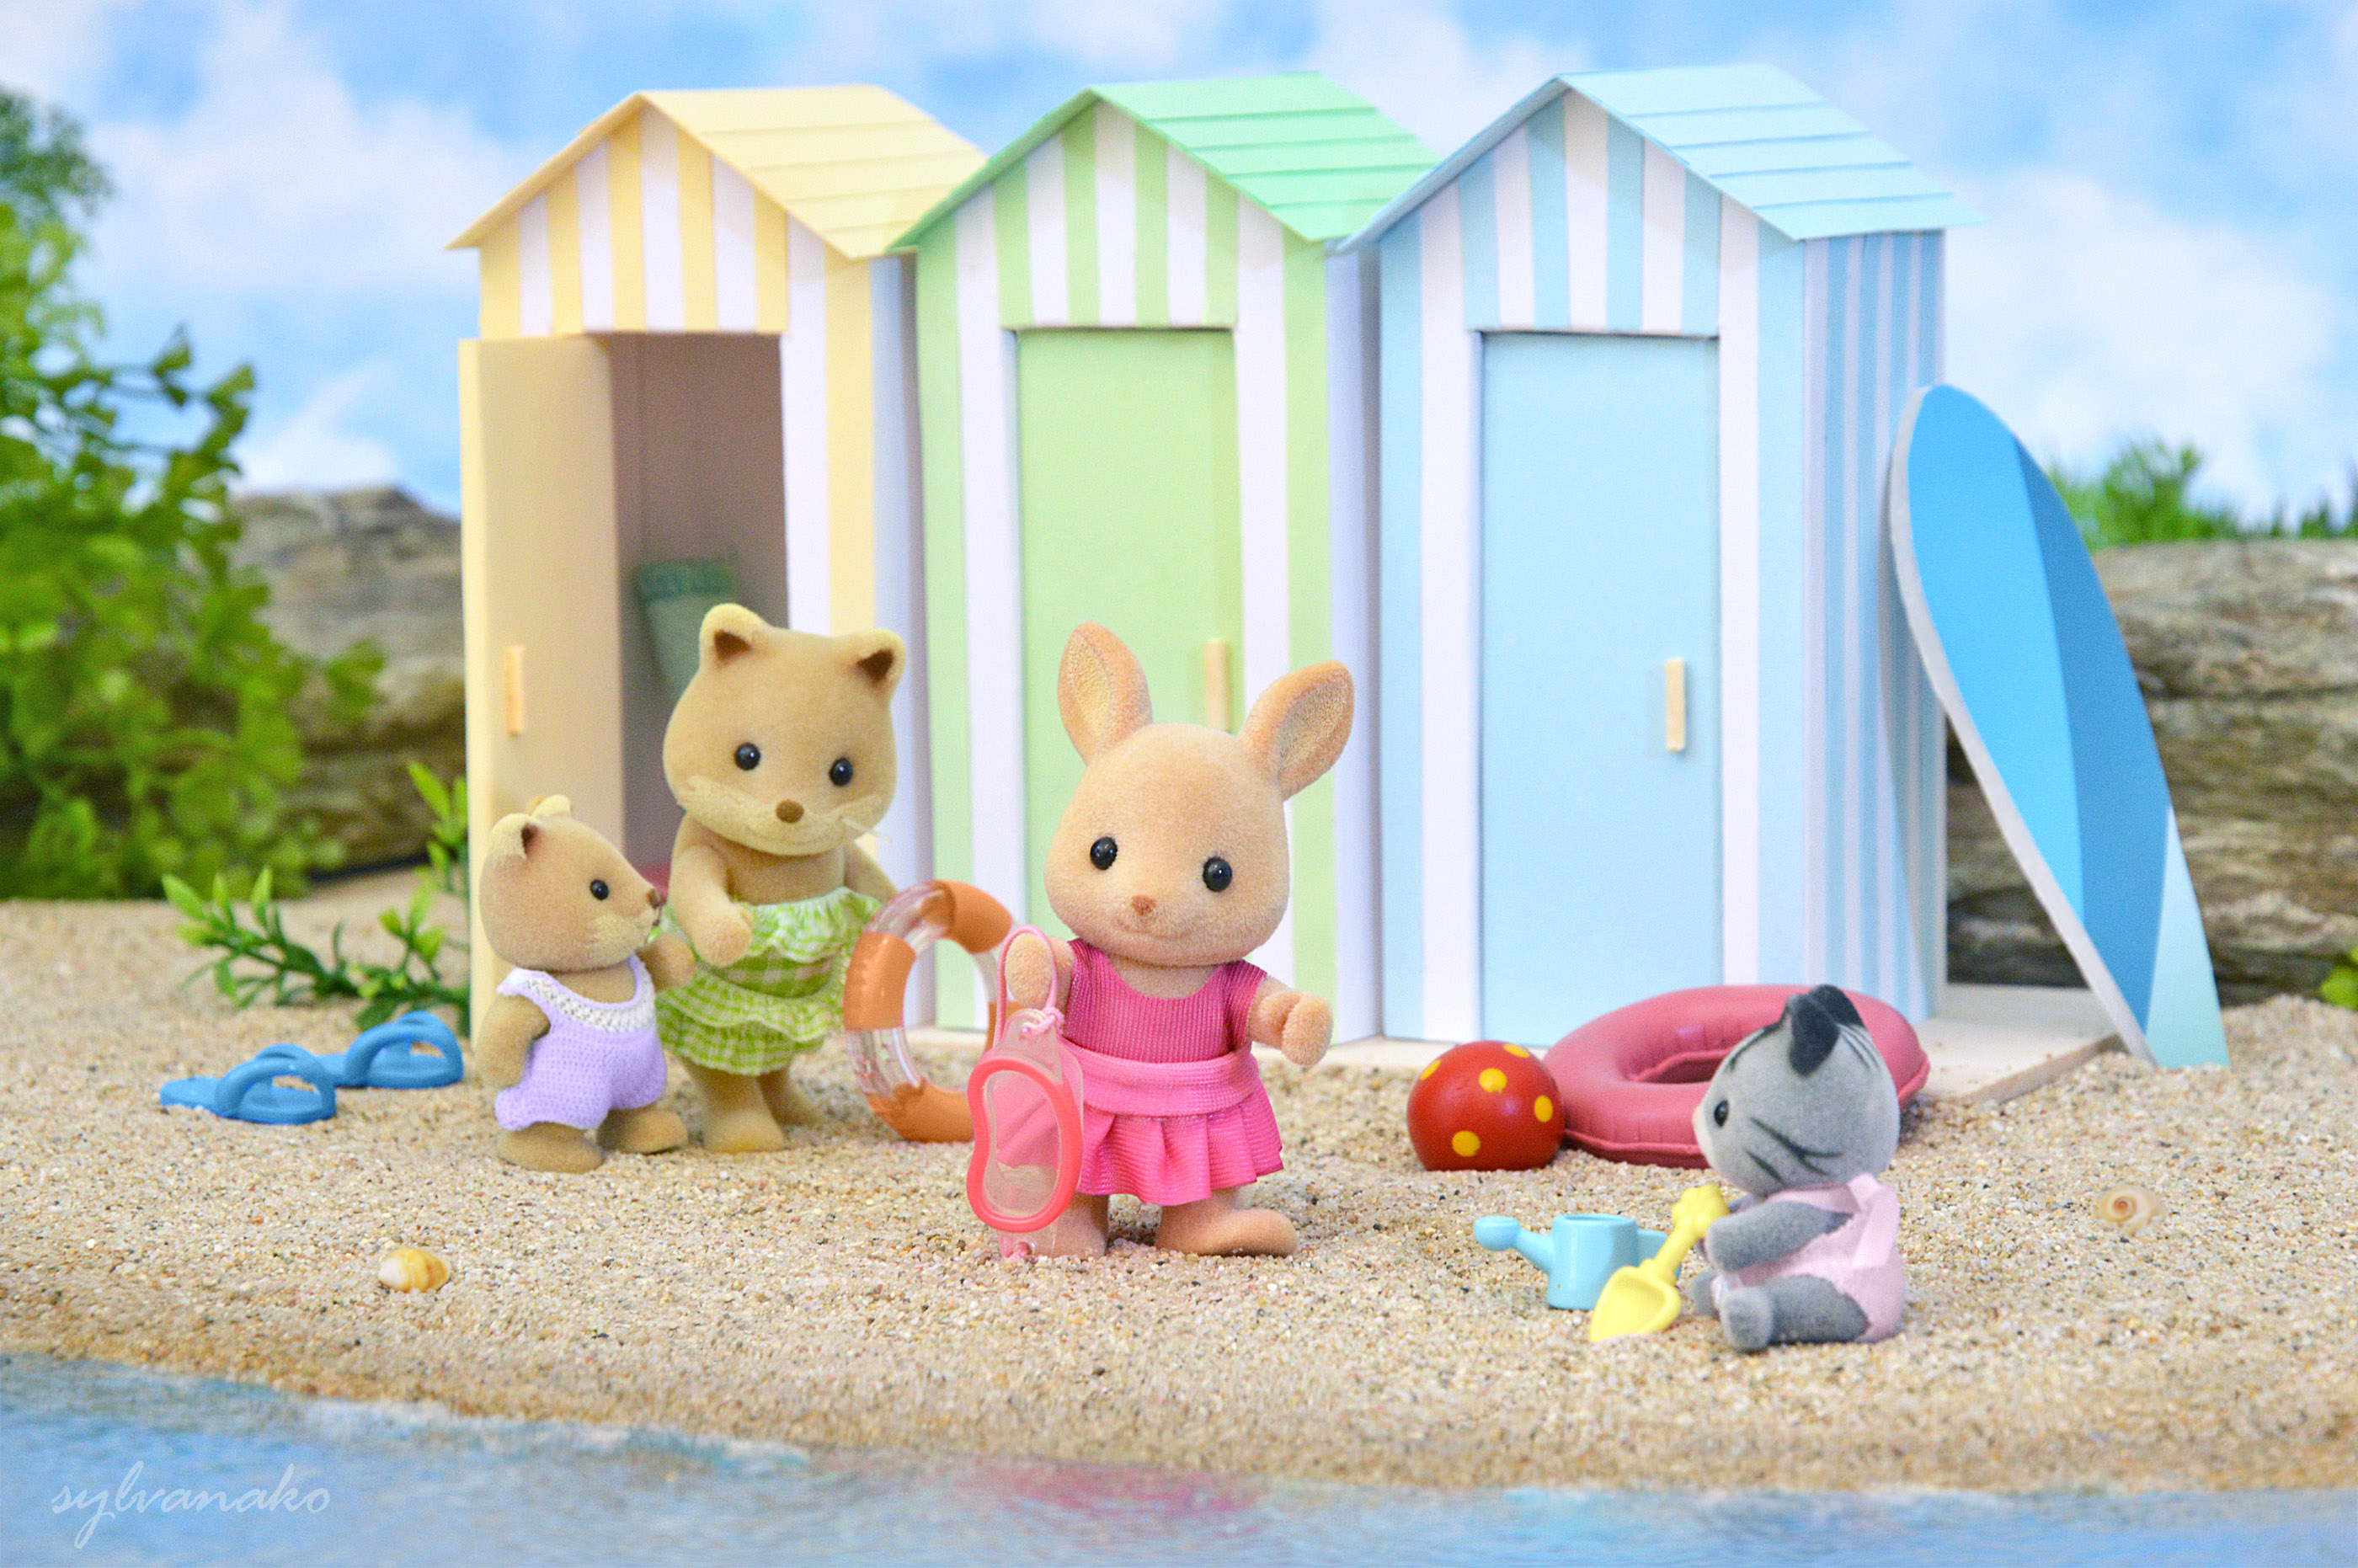 Calico Critters on a sandy beach in bathing suits, in front of beach pastel changing rooms.